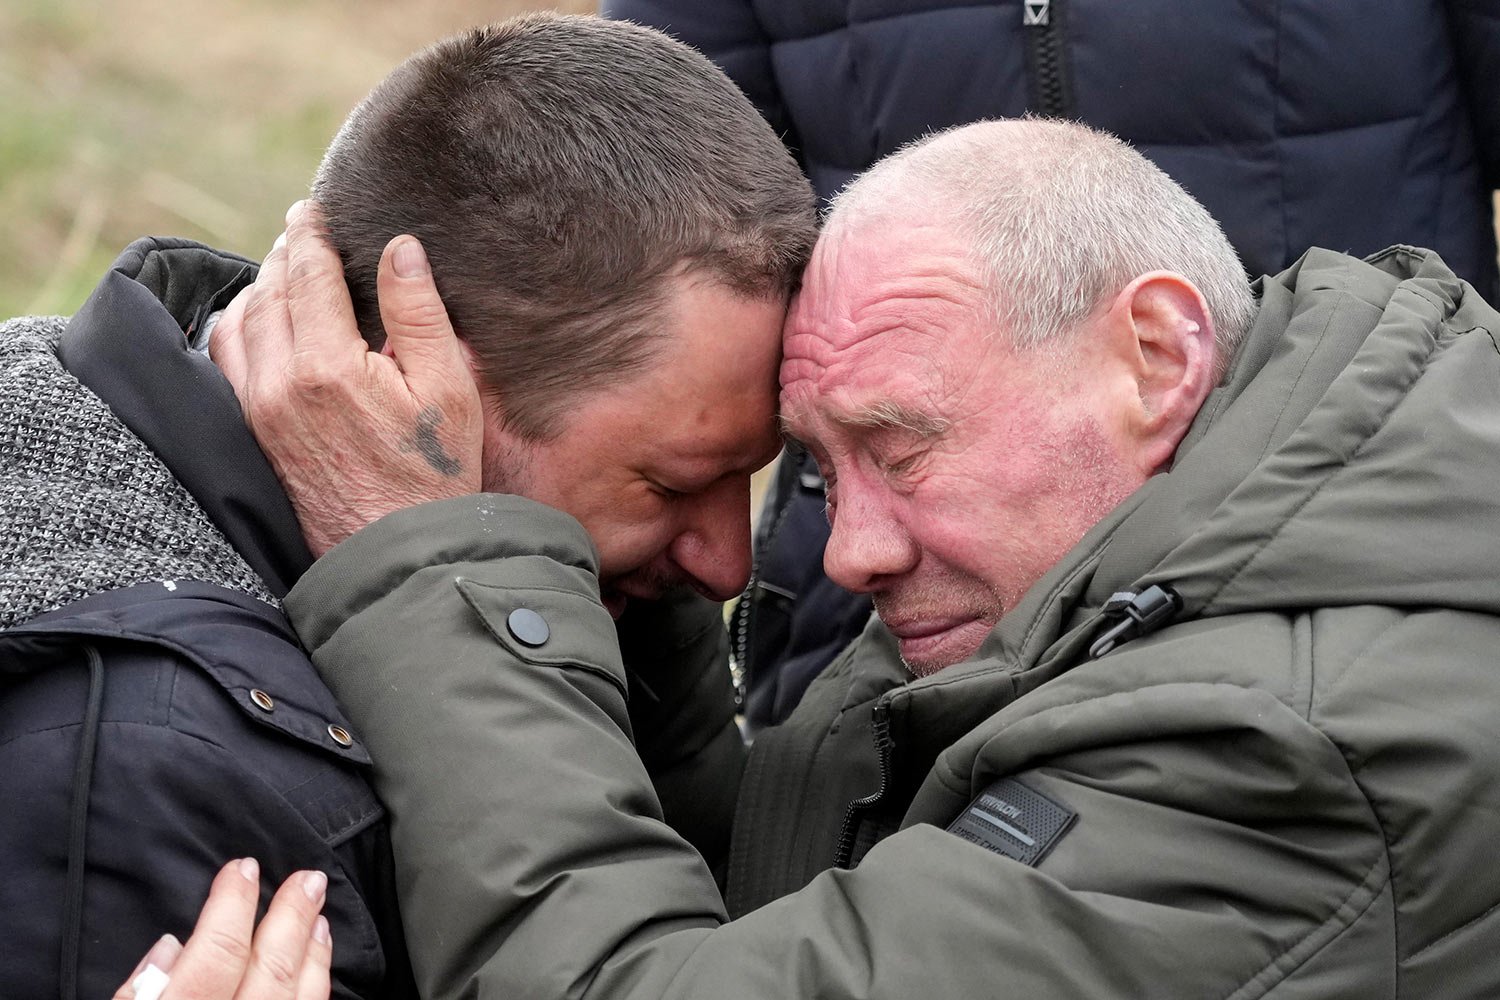  Relatives cry at the mass grave of civilians killed during Russian occupation in Bucha, on the outskirts of Kyiv, Ukraine, Friday, April 8, 2022. (AP Photo/Efrem Lukatsky) 